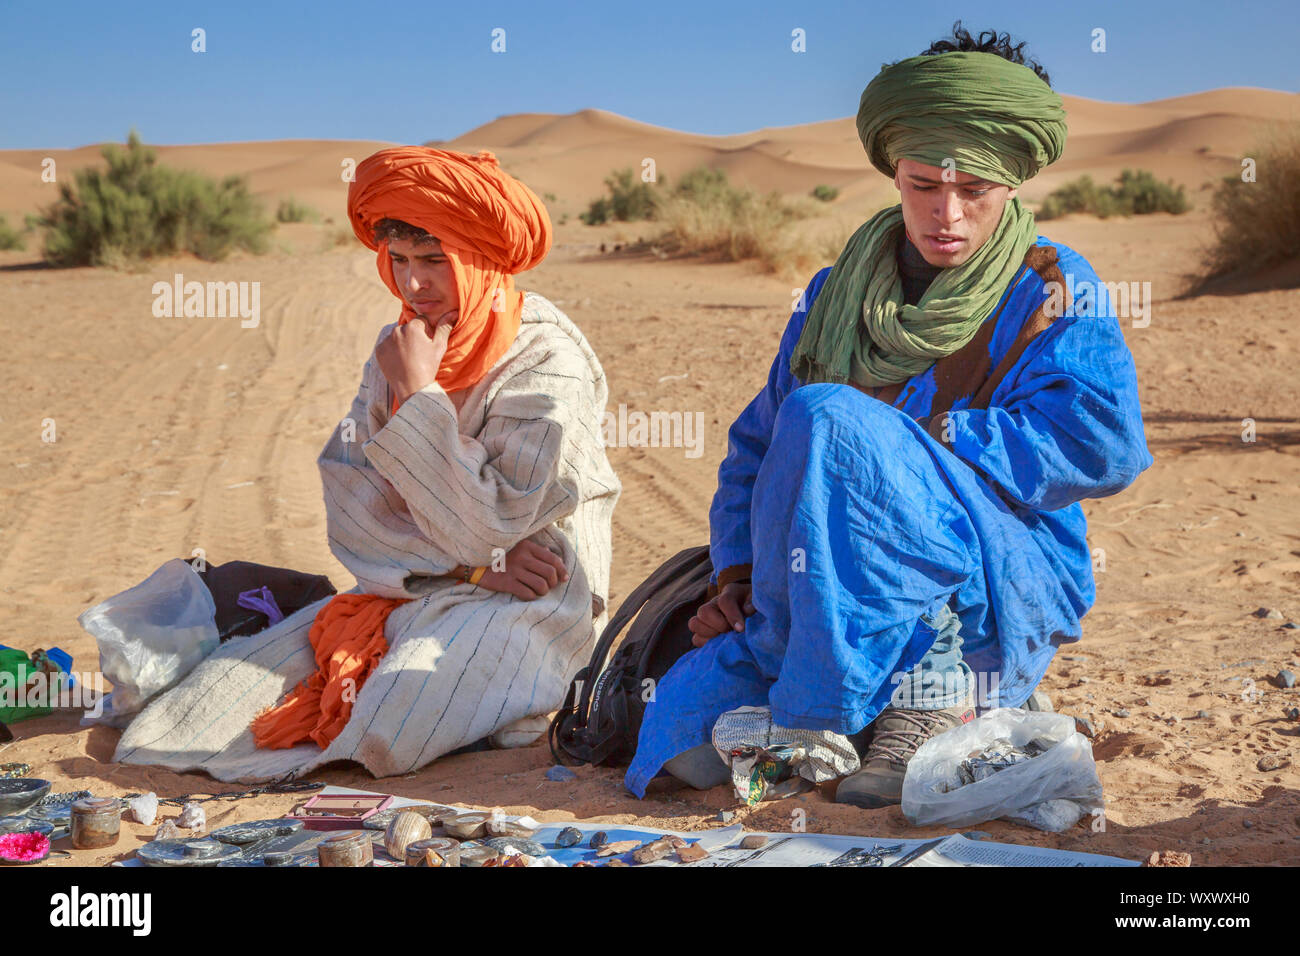 Merzouga, Morocco - February 25, 2016: Nomad souvenir vendors of the Sahara desert dressed in colorful robes and turbans, sitting on the sand under a Stock Photo